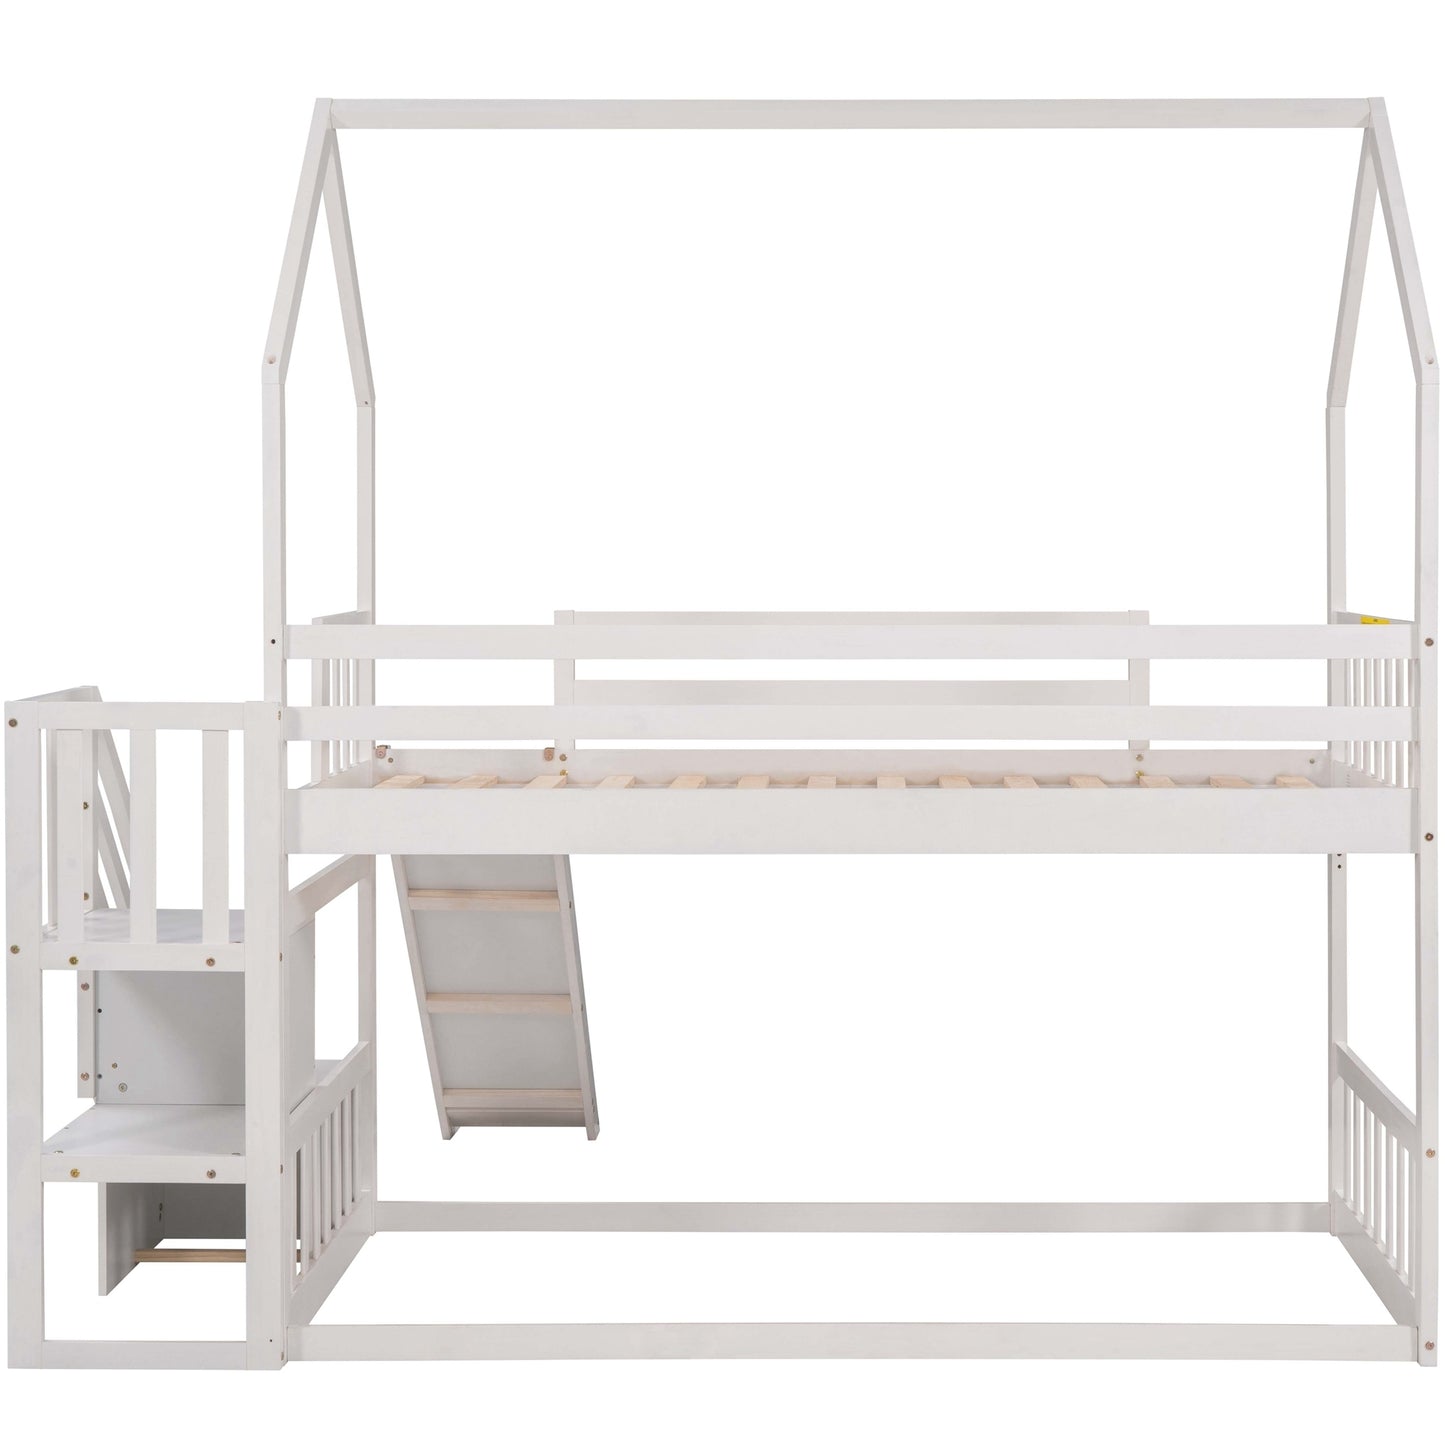 Twin over Twin House Bunk Bed with Convertible Slide,Storage Staircase,White